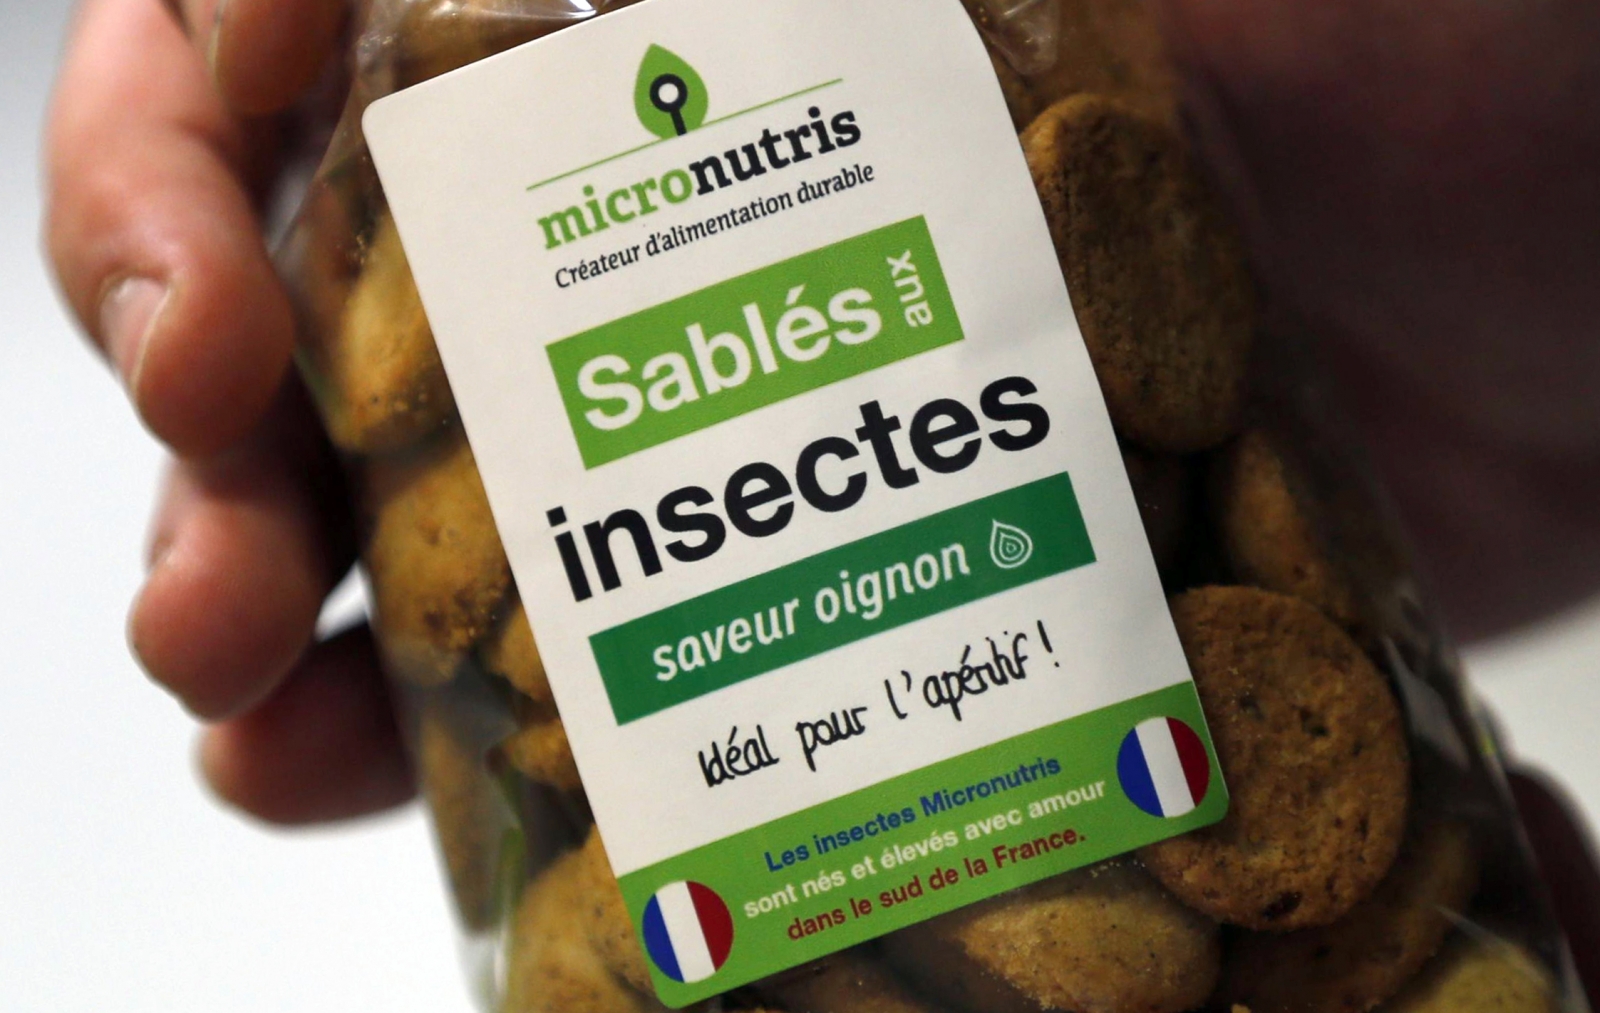 Insect Sables Micronutris